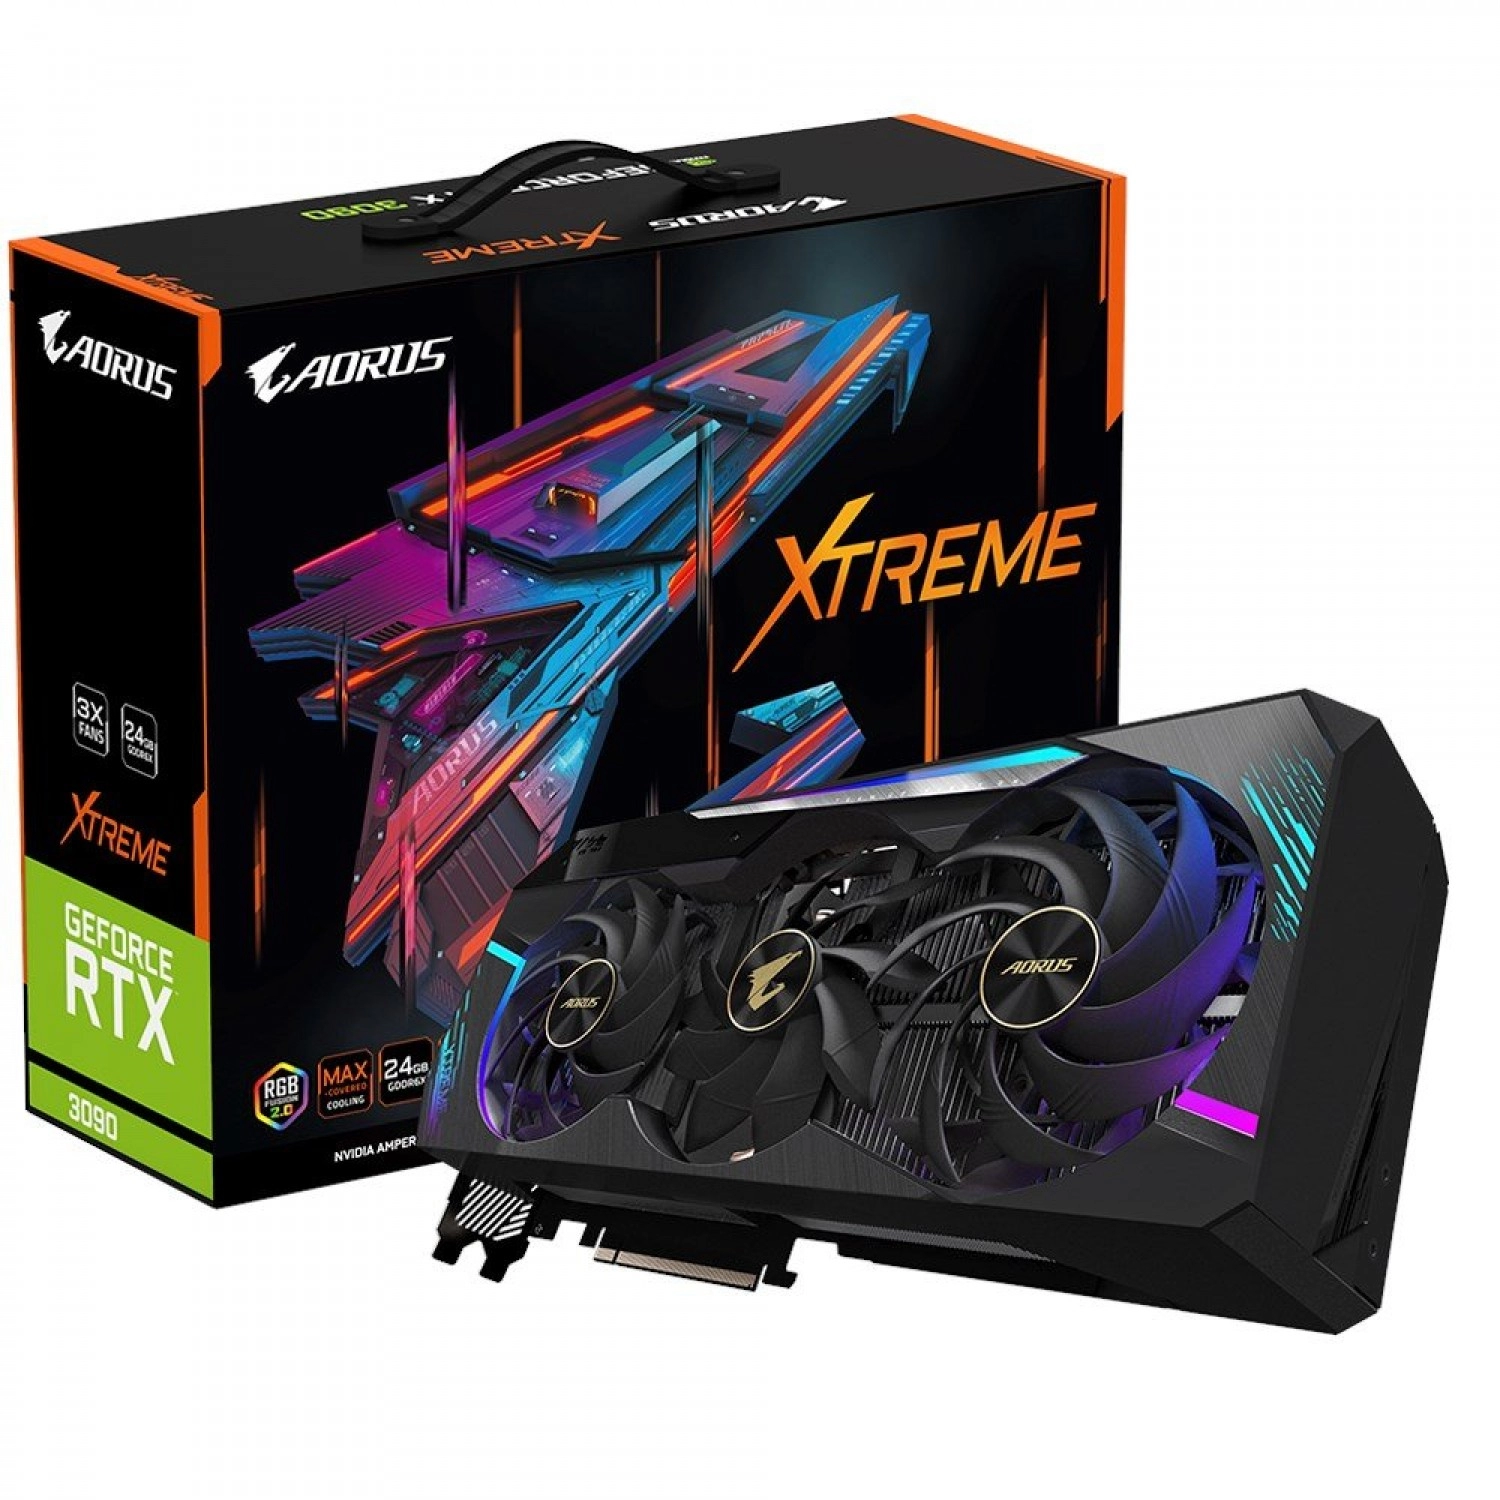 AORUS GeForce RTX 3090 XTREME 24G Package